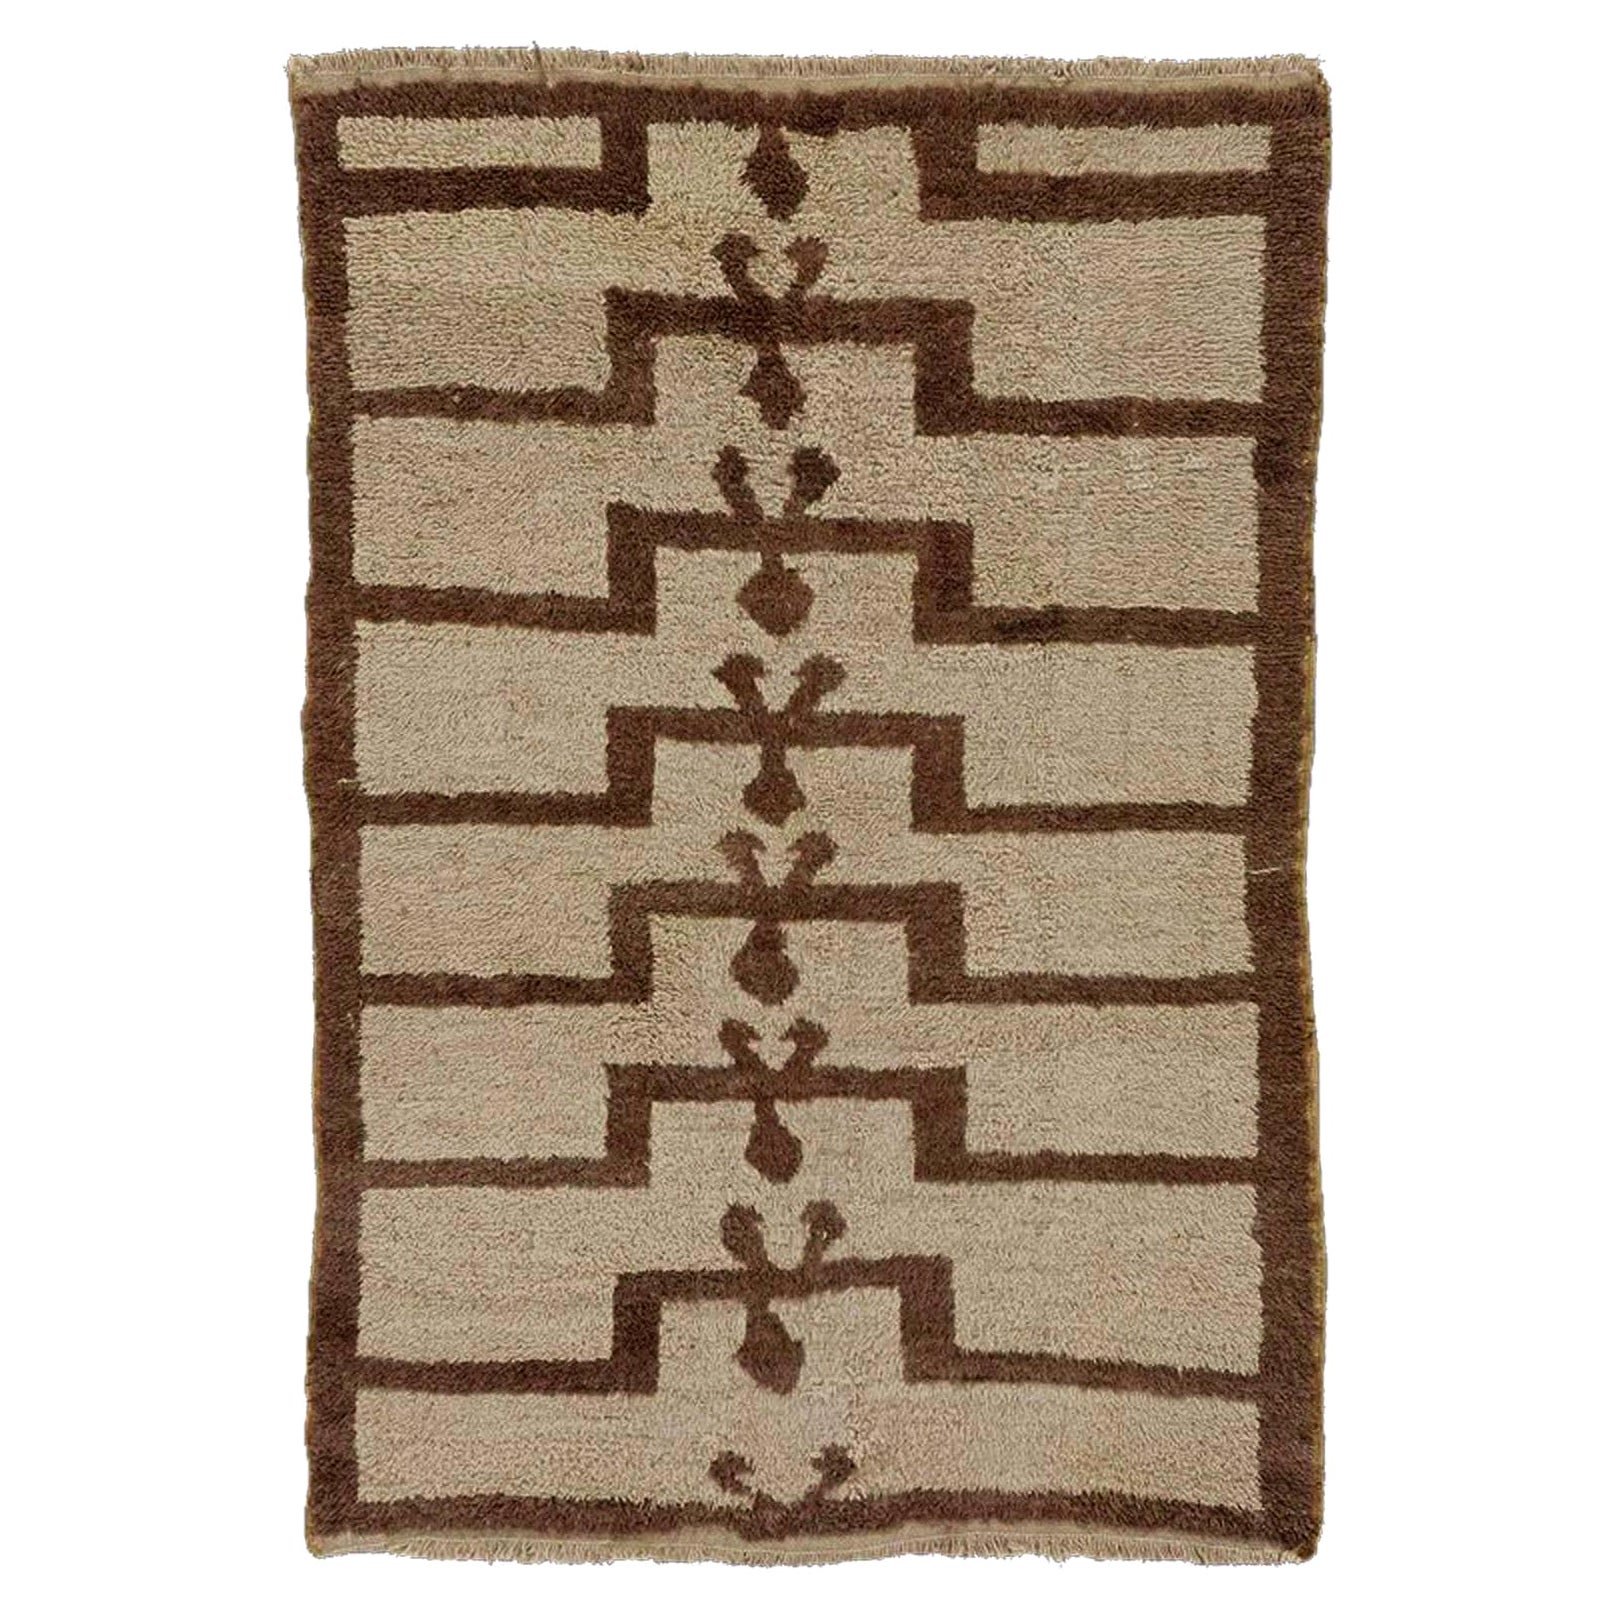 20th Century Tulu Prayer Hand-Knotted Rug by Wool Grey and Brown Turkish